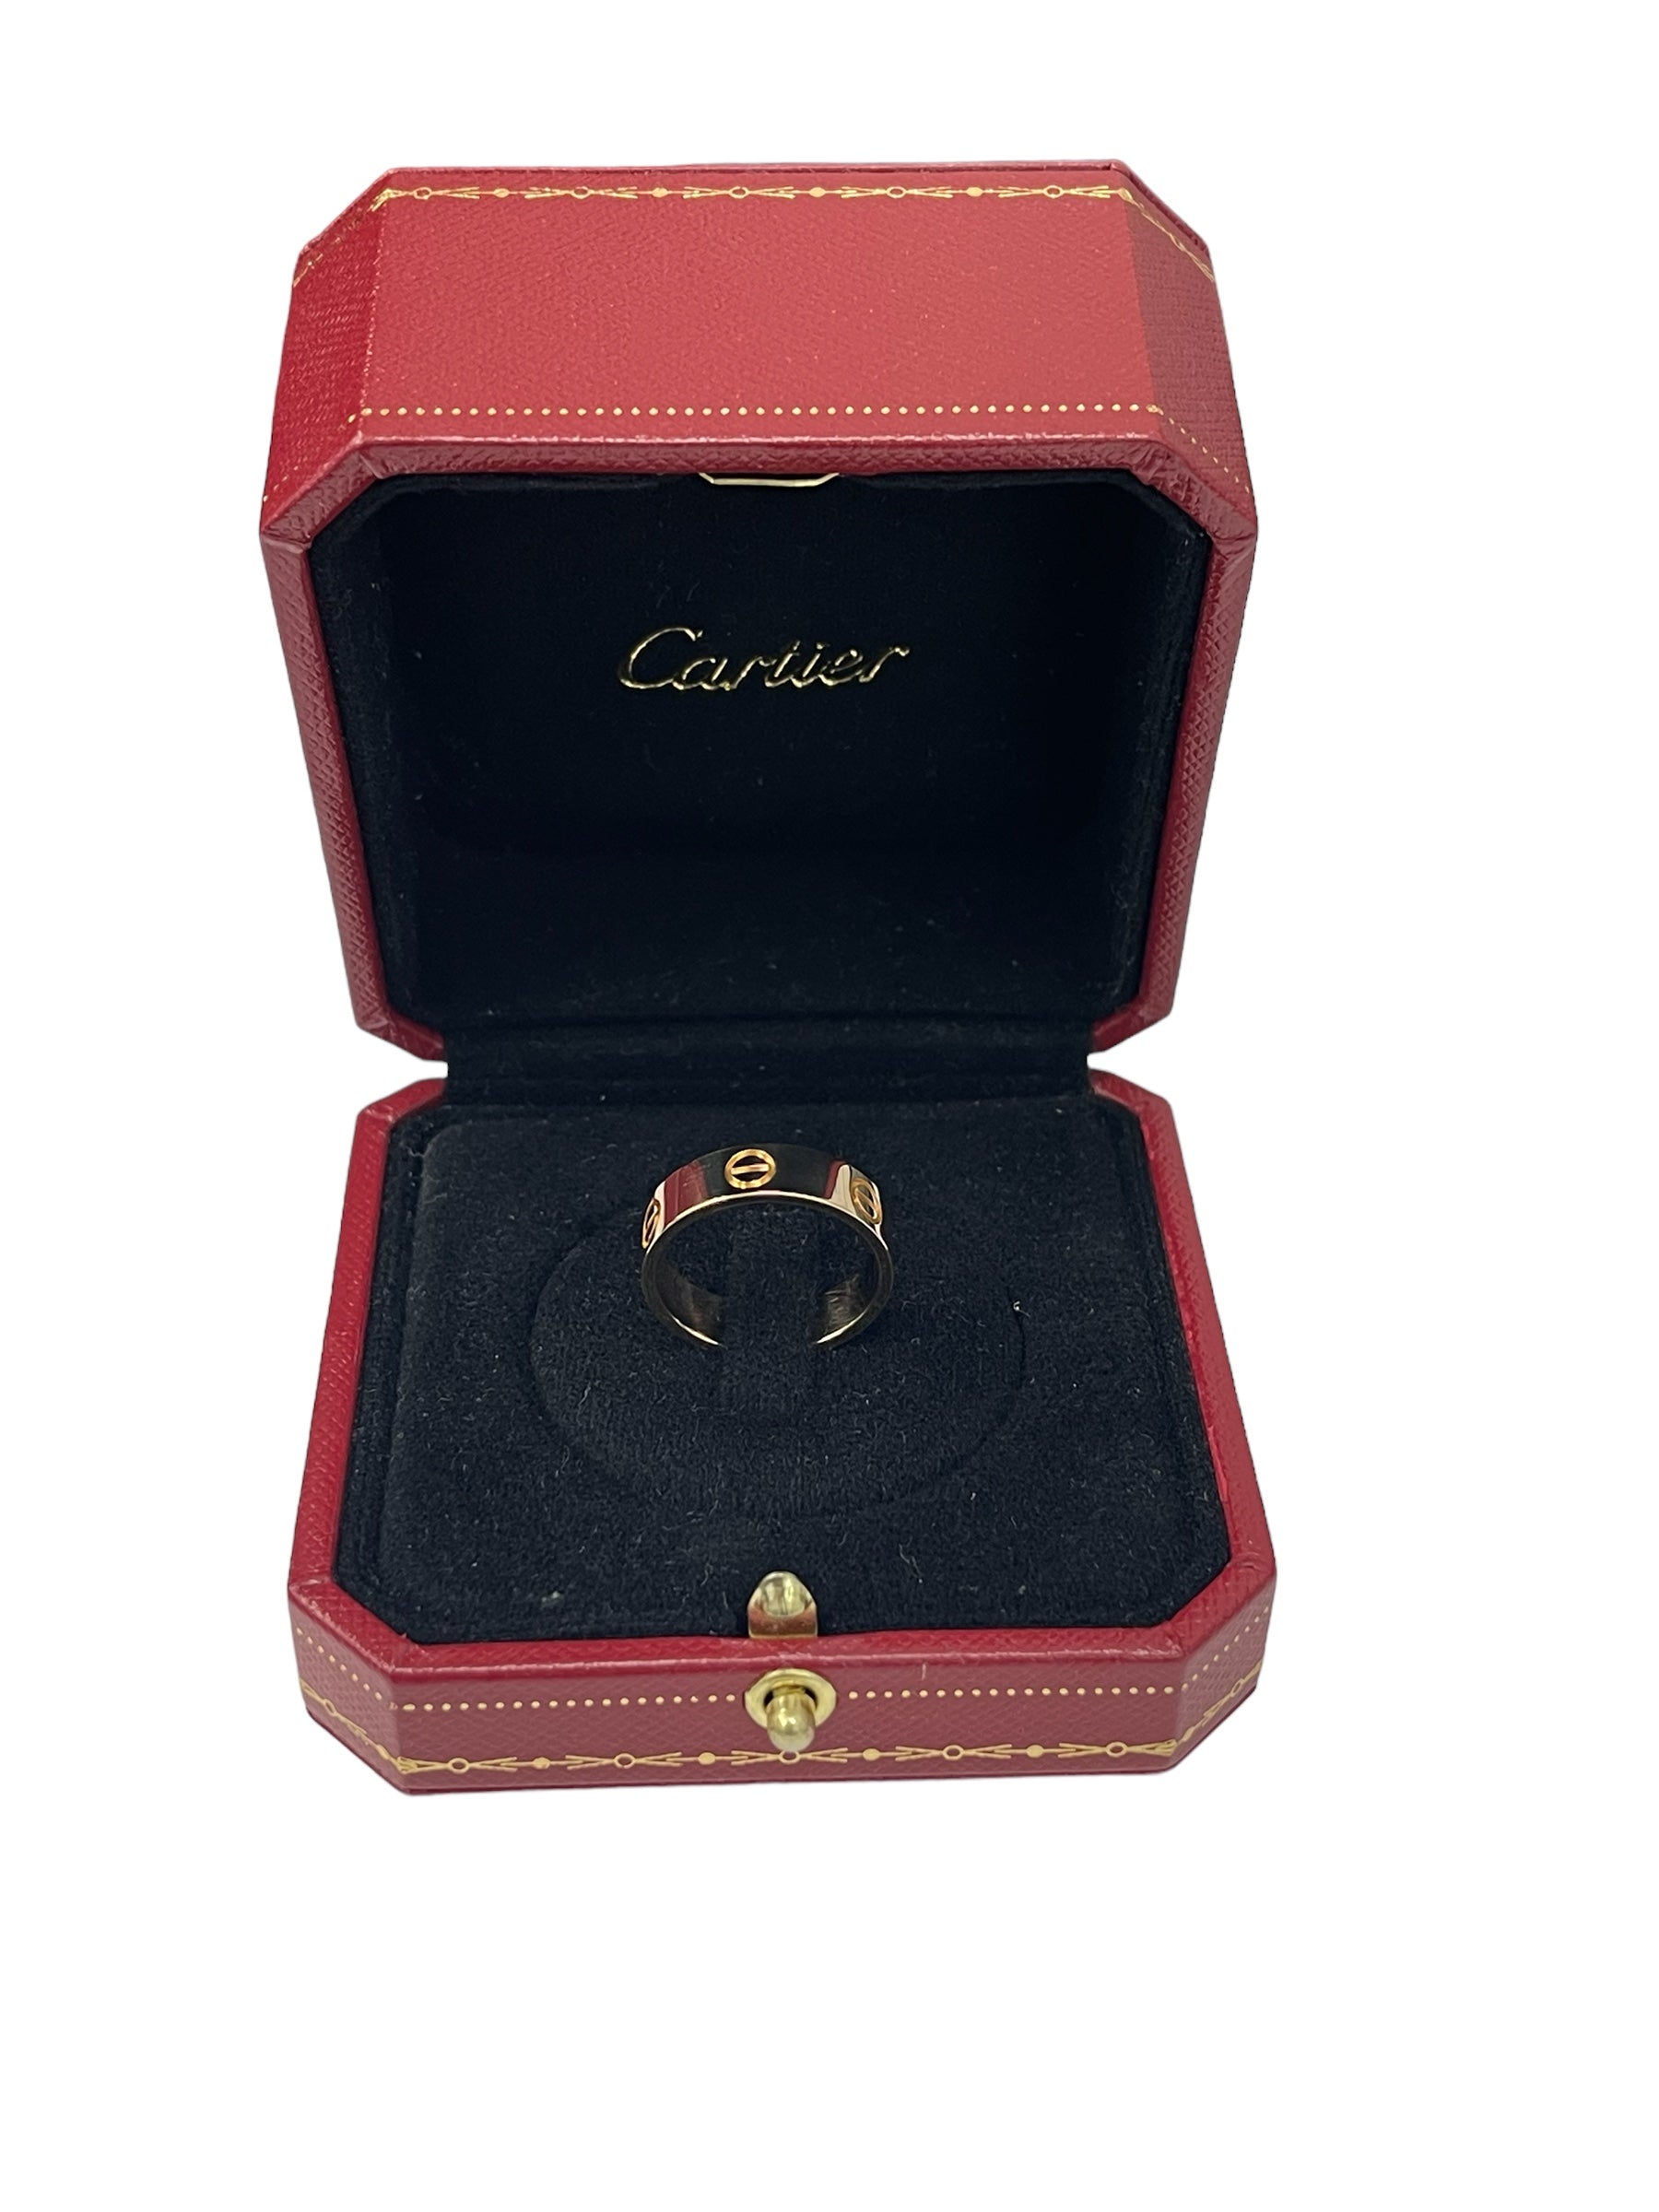 Cartier Love Ring 18kt Yellow Gold Size 55 Complete Set